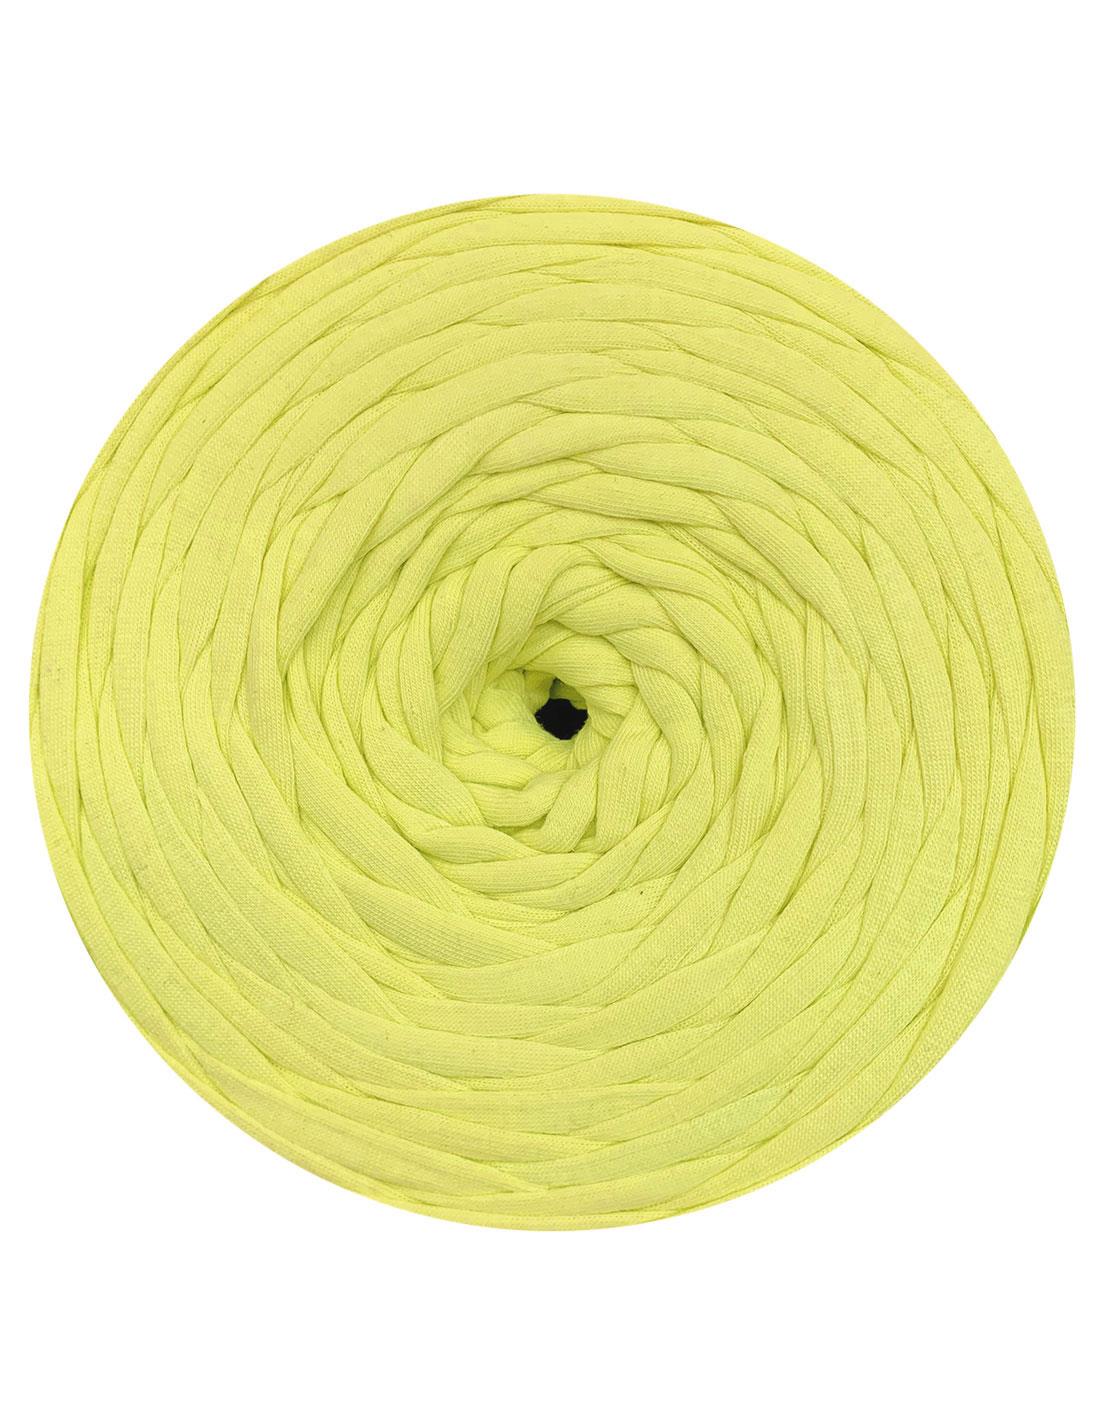 Light lime t-shirt yarn by Hoooked Zpagetti (100-120m)